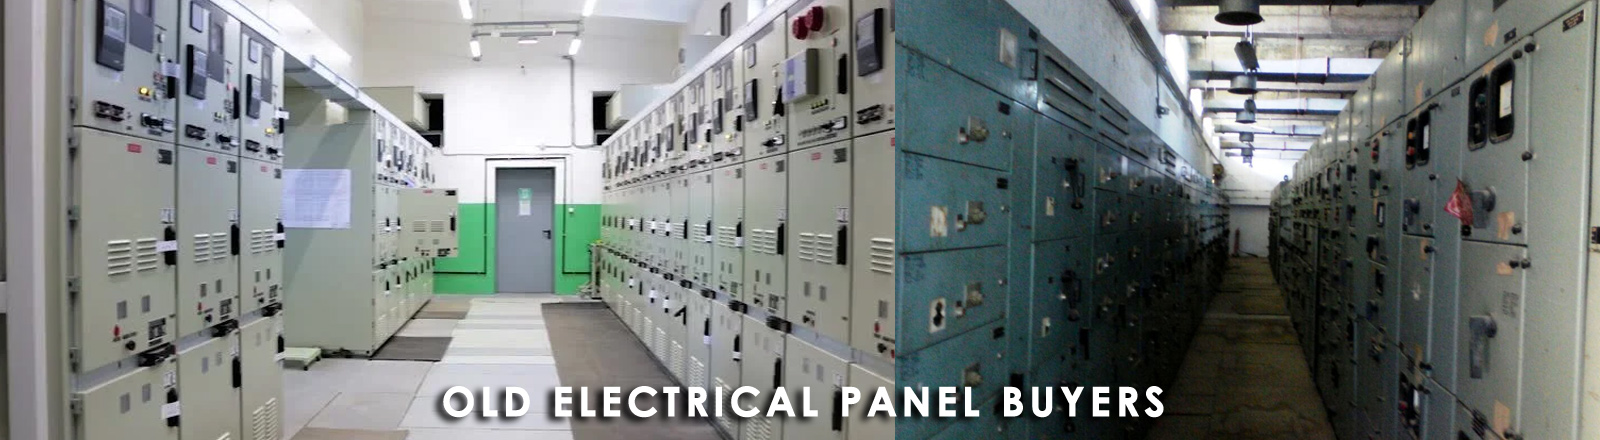 sell-old-electrical-panels